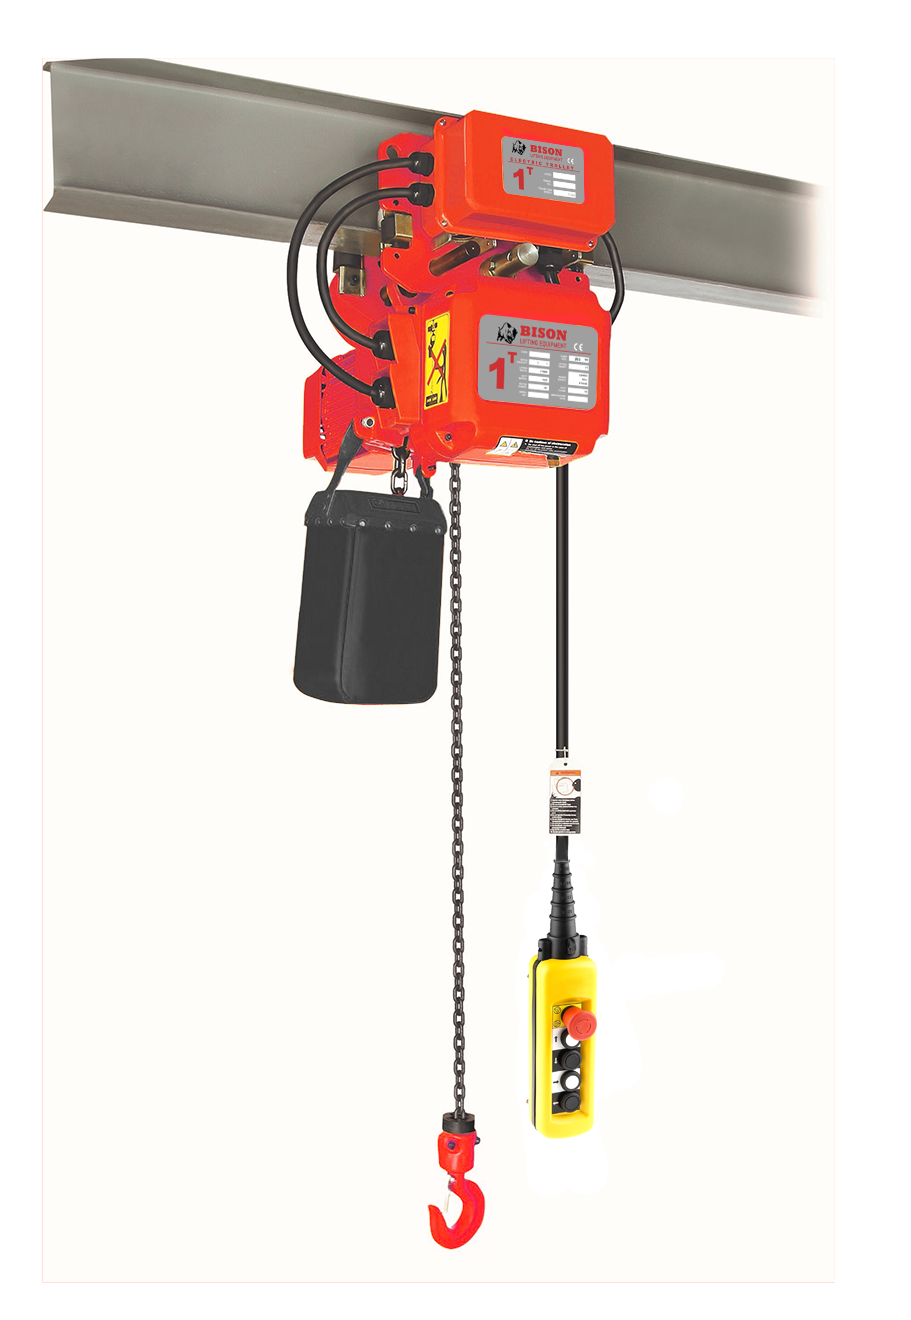 Bison Lifting HHBD01SK-01-WPC01 1 Ton 3 Phase Single Speed Electric Chain Hoist with Trolley - 20ft of Lift 3-Ph 230V/460V HHBD01SK-01-WPC01